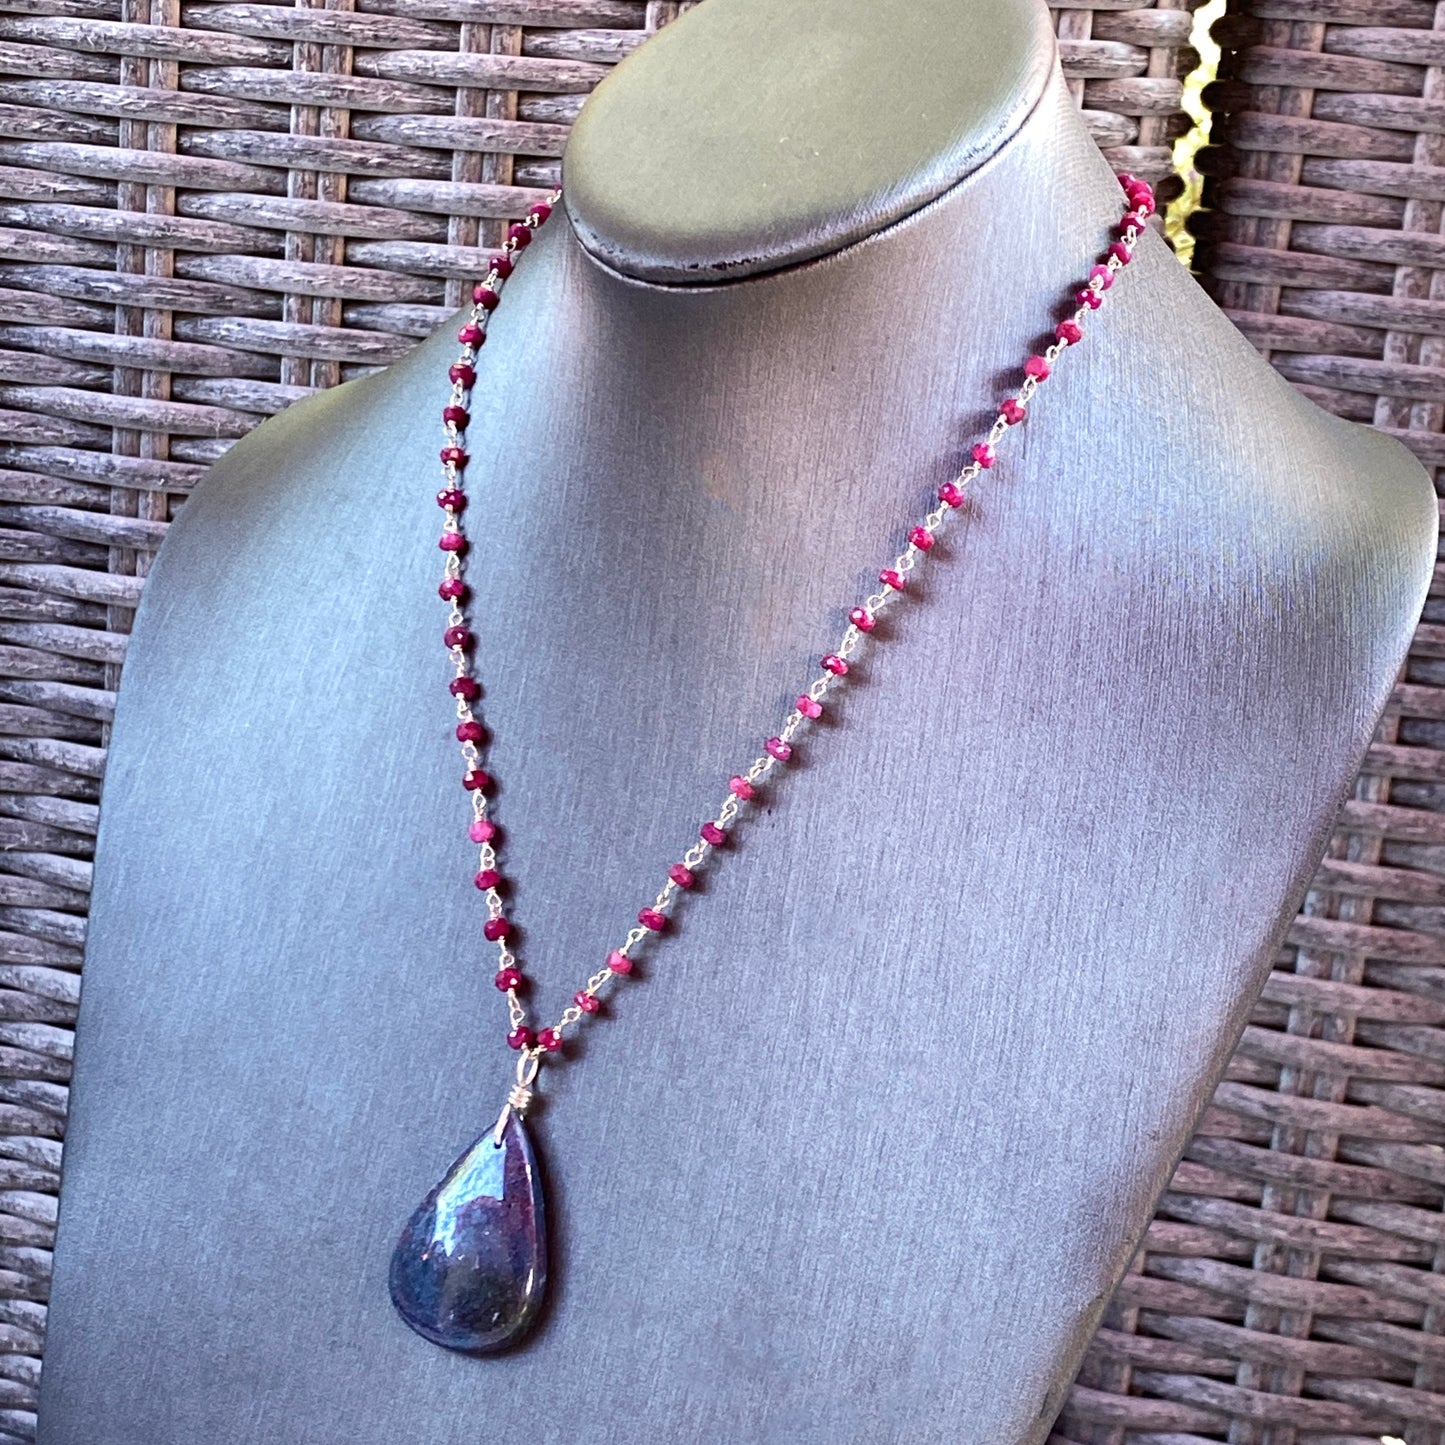 Ruby in Kyanite Pendant silver chain Necklace